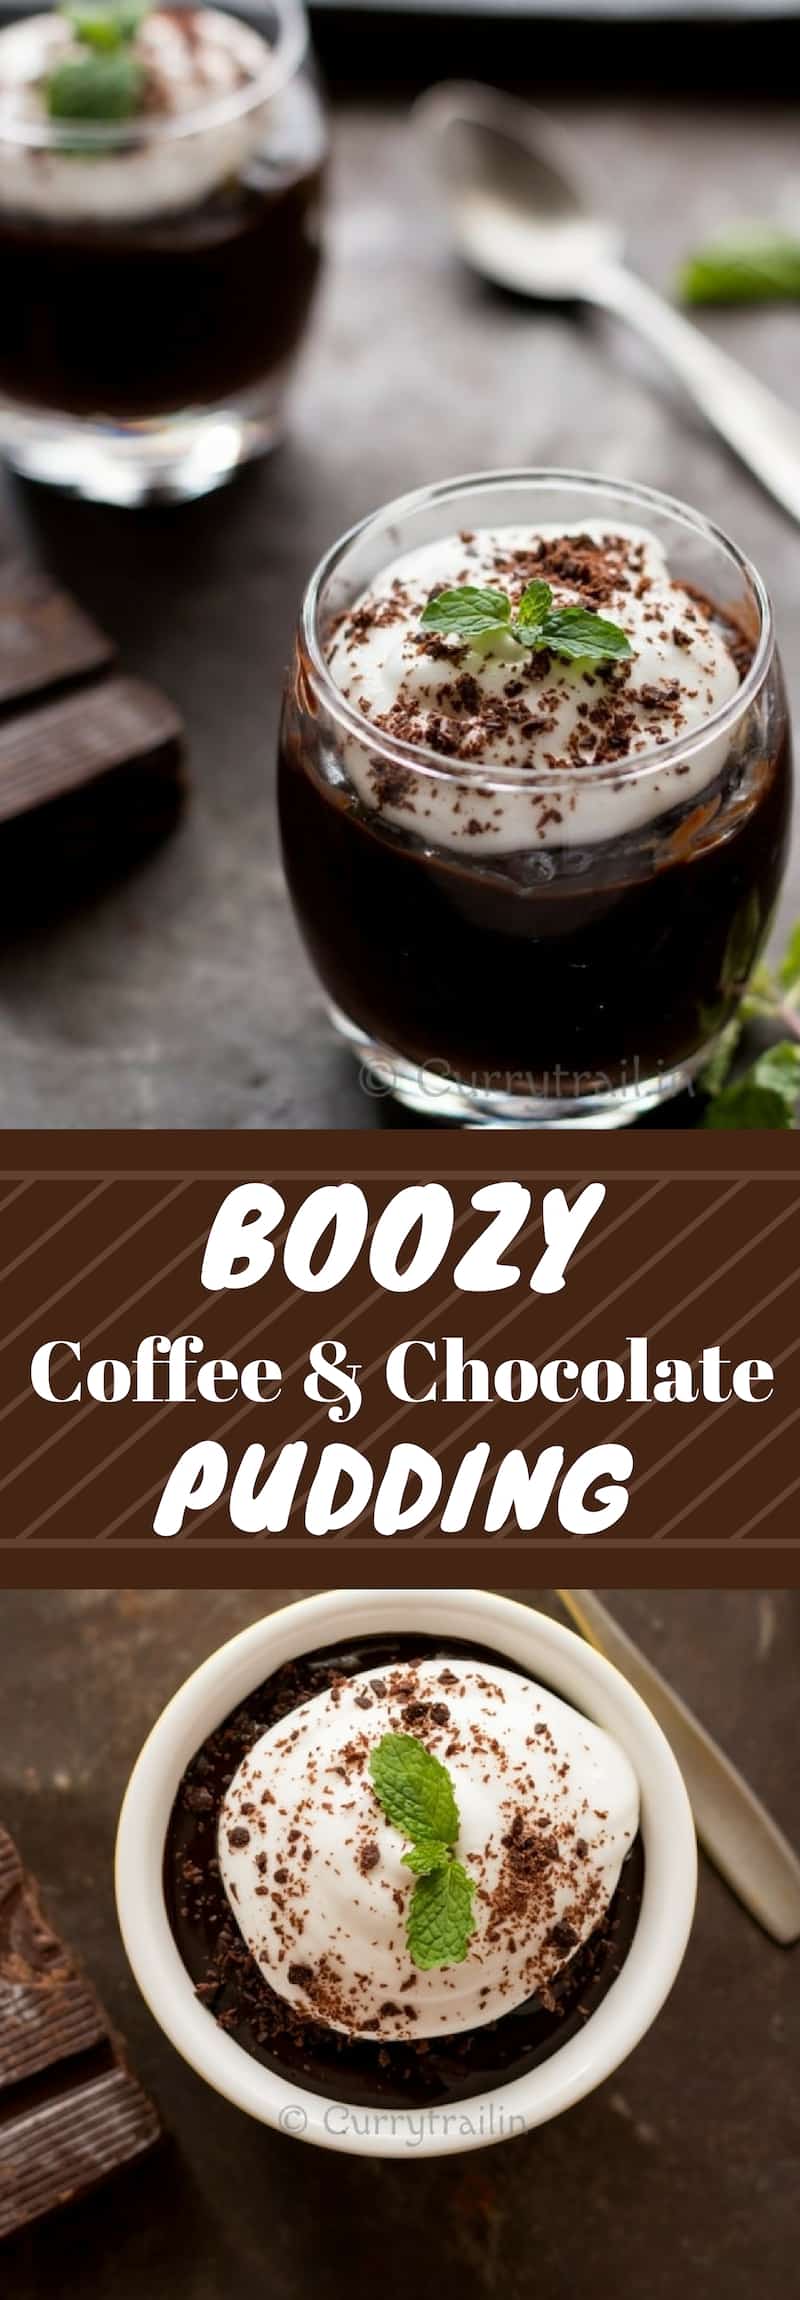 boozy coffee and chocolate pudding with text overlay